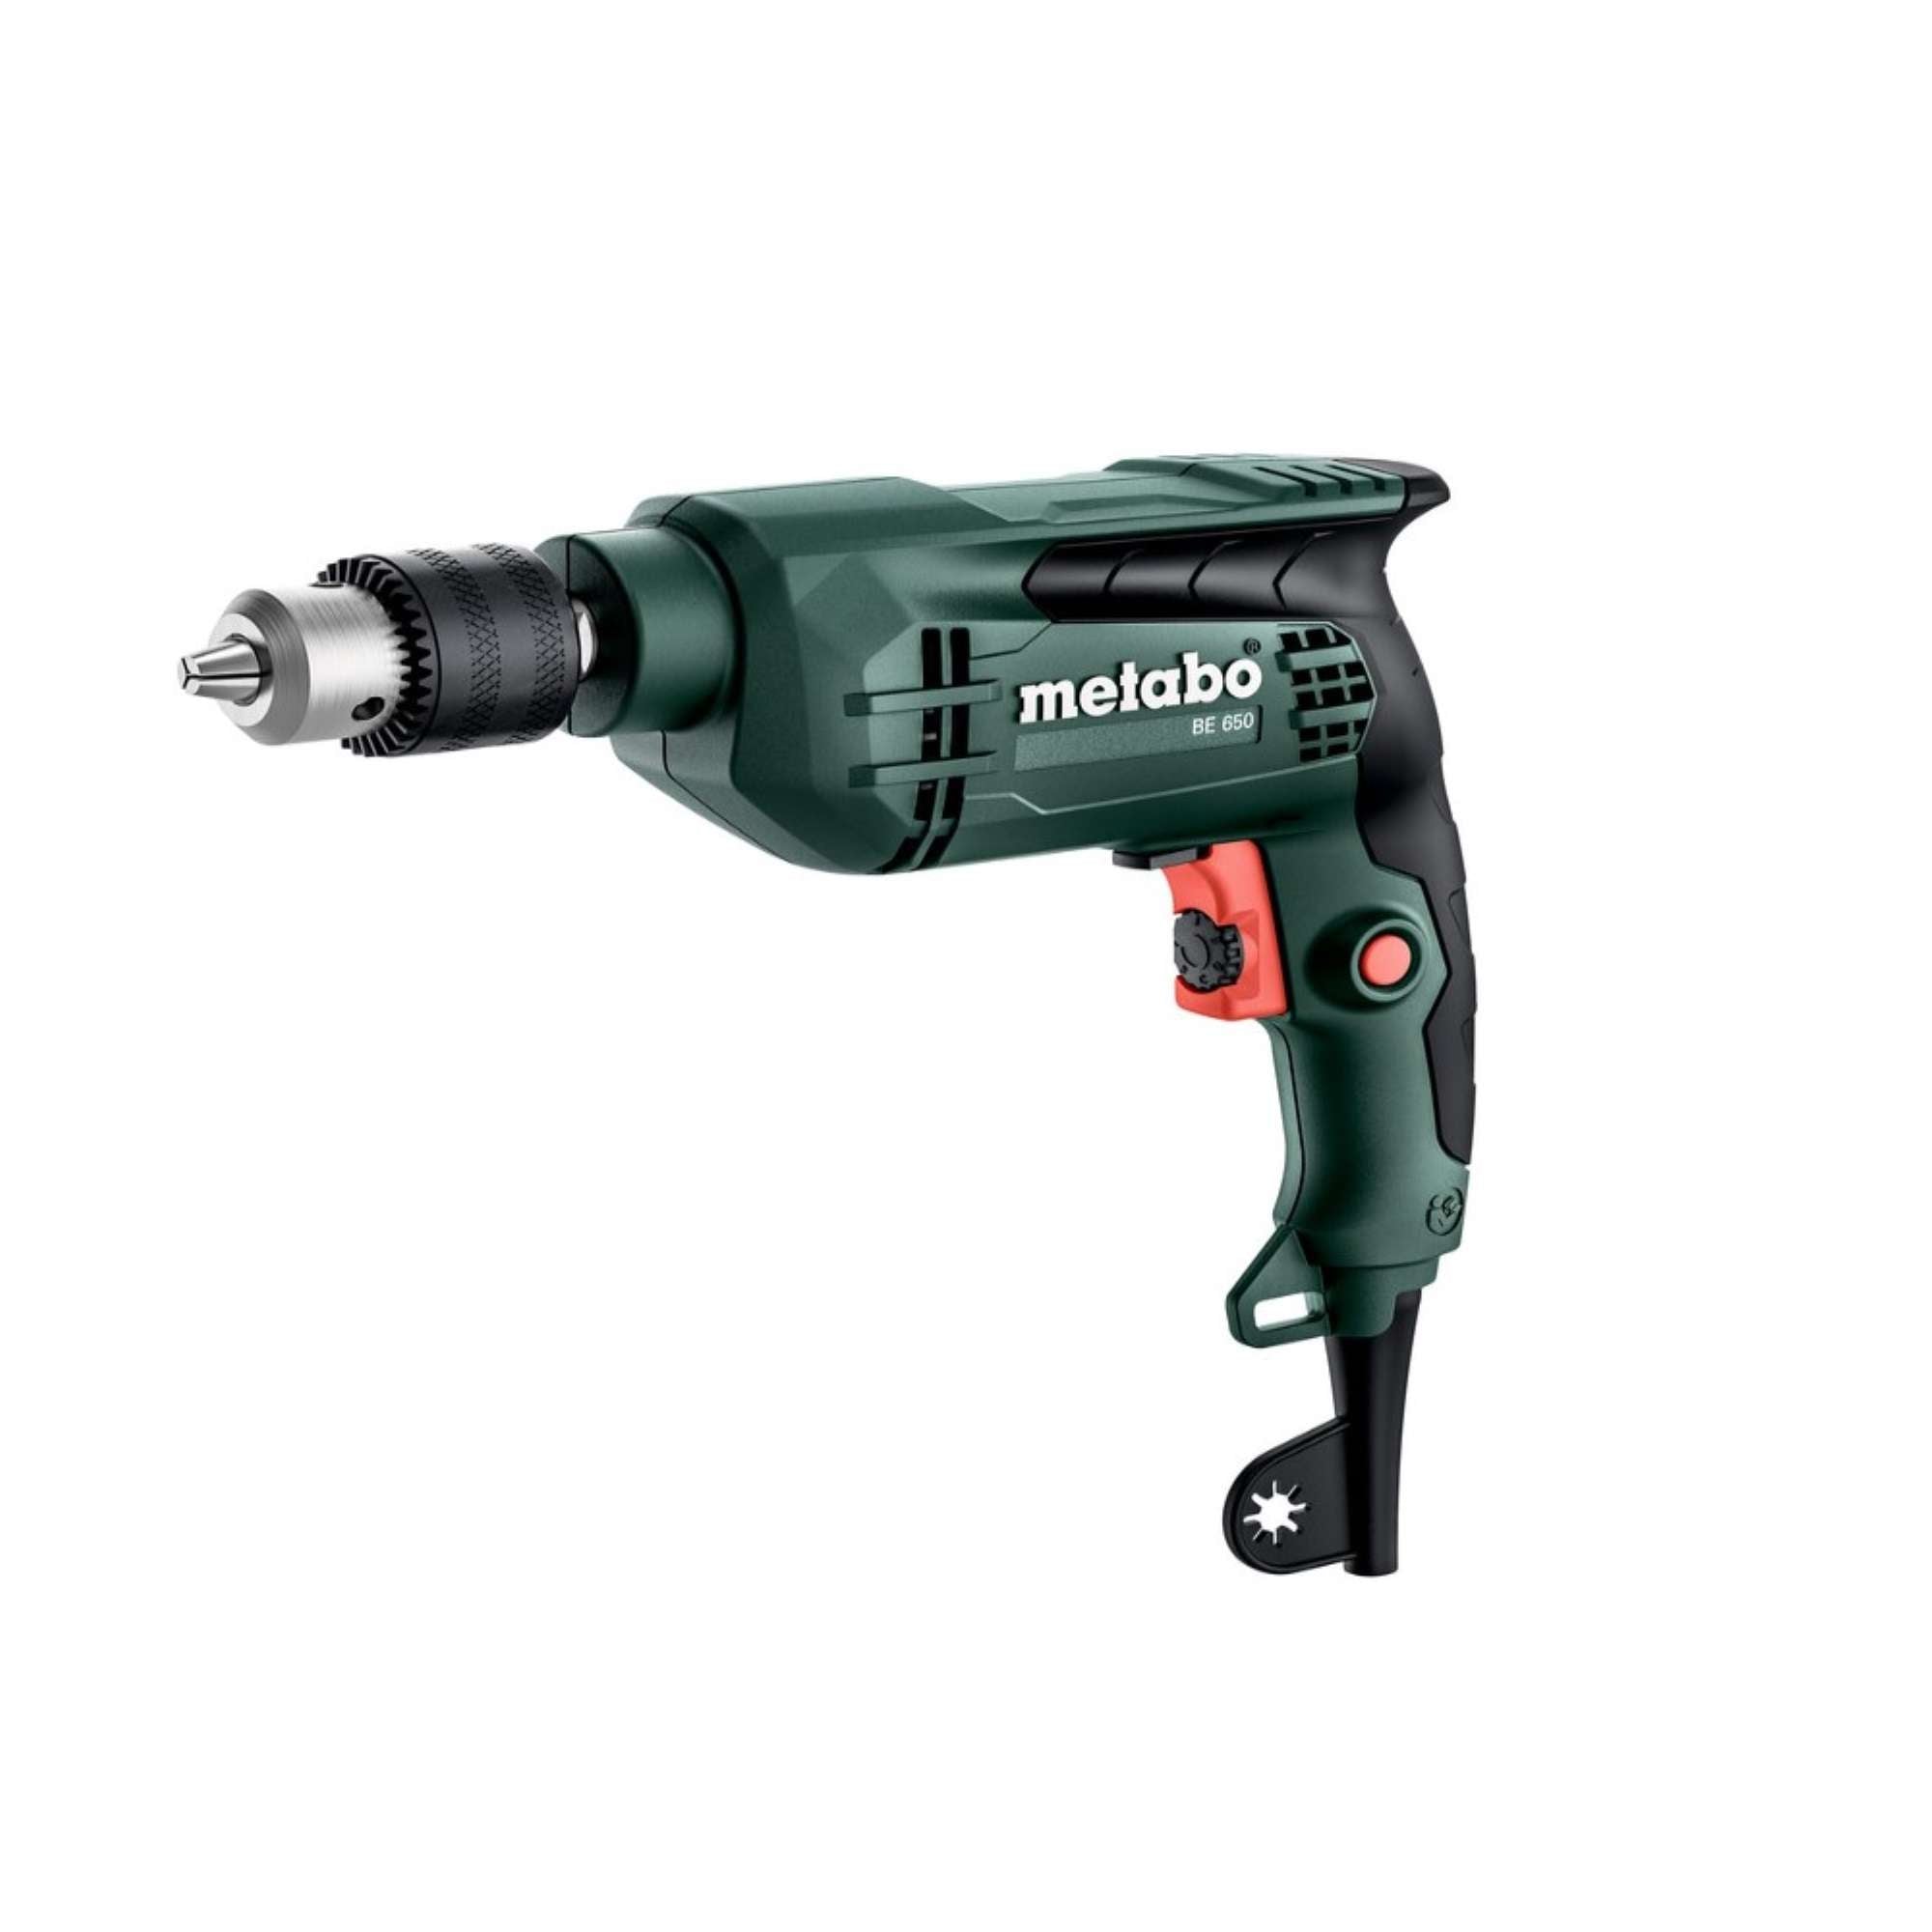 Trapano BE 650, 650W, D. foratura acciaio 13mm - Metabo 600741000